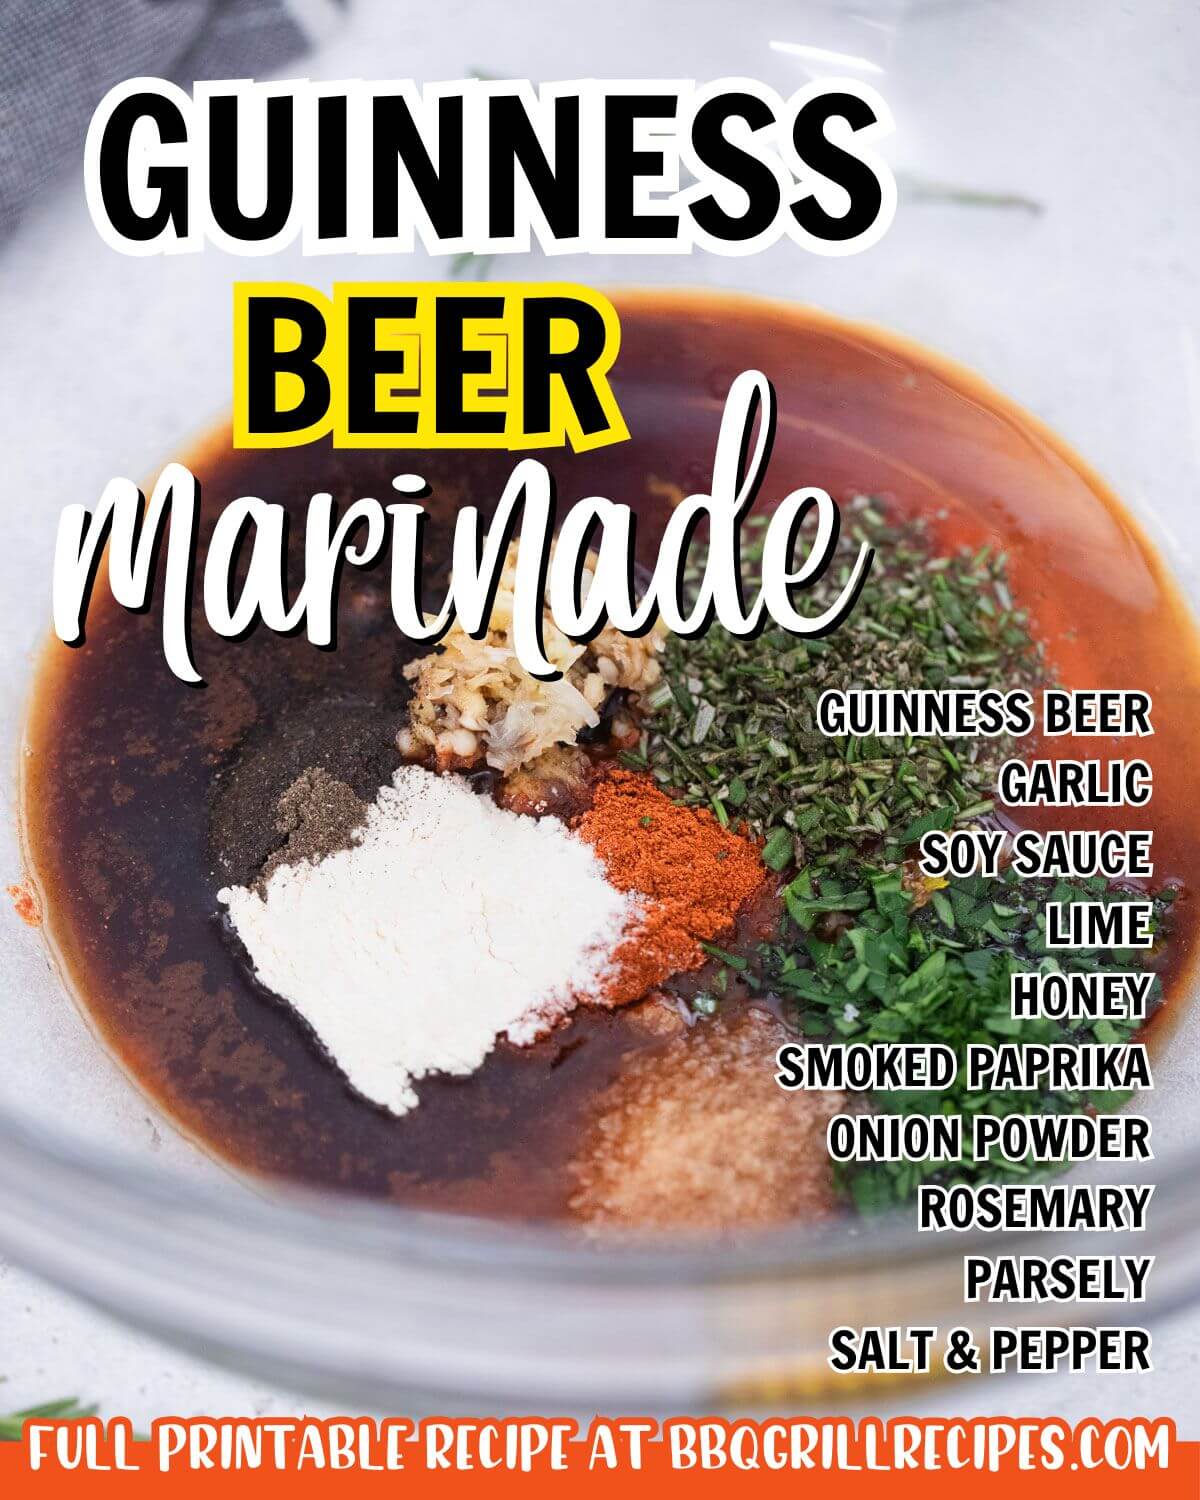 pinterest image - guinness beer marinade with ingredients list.